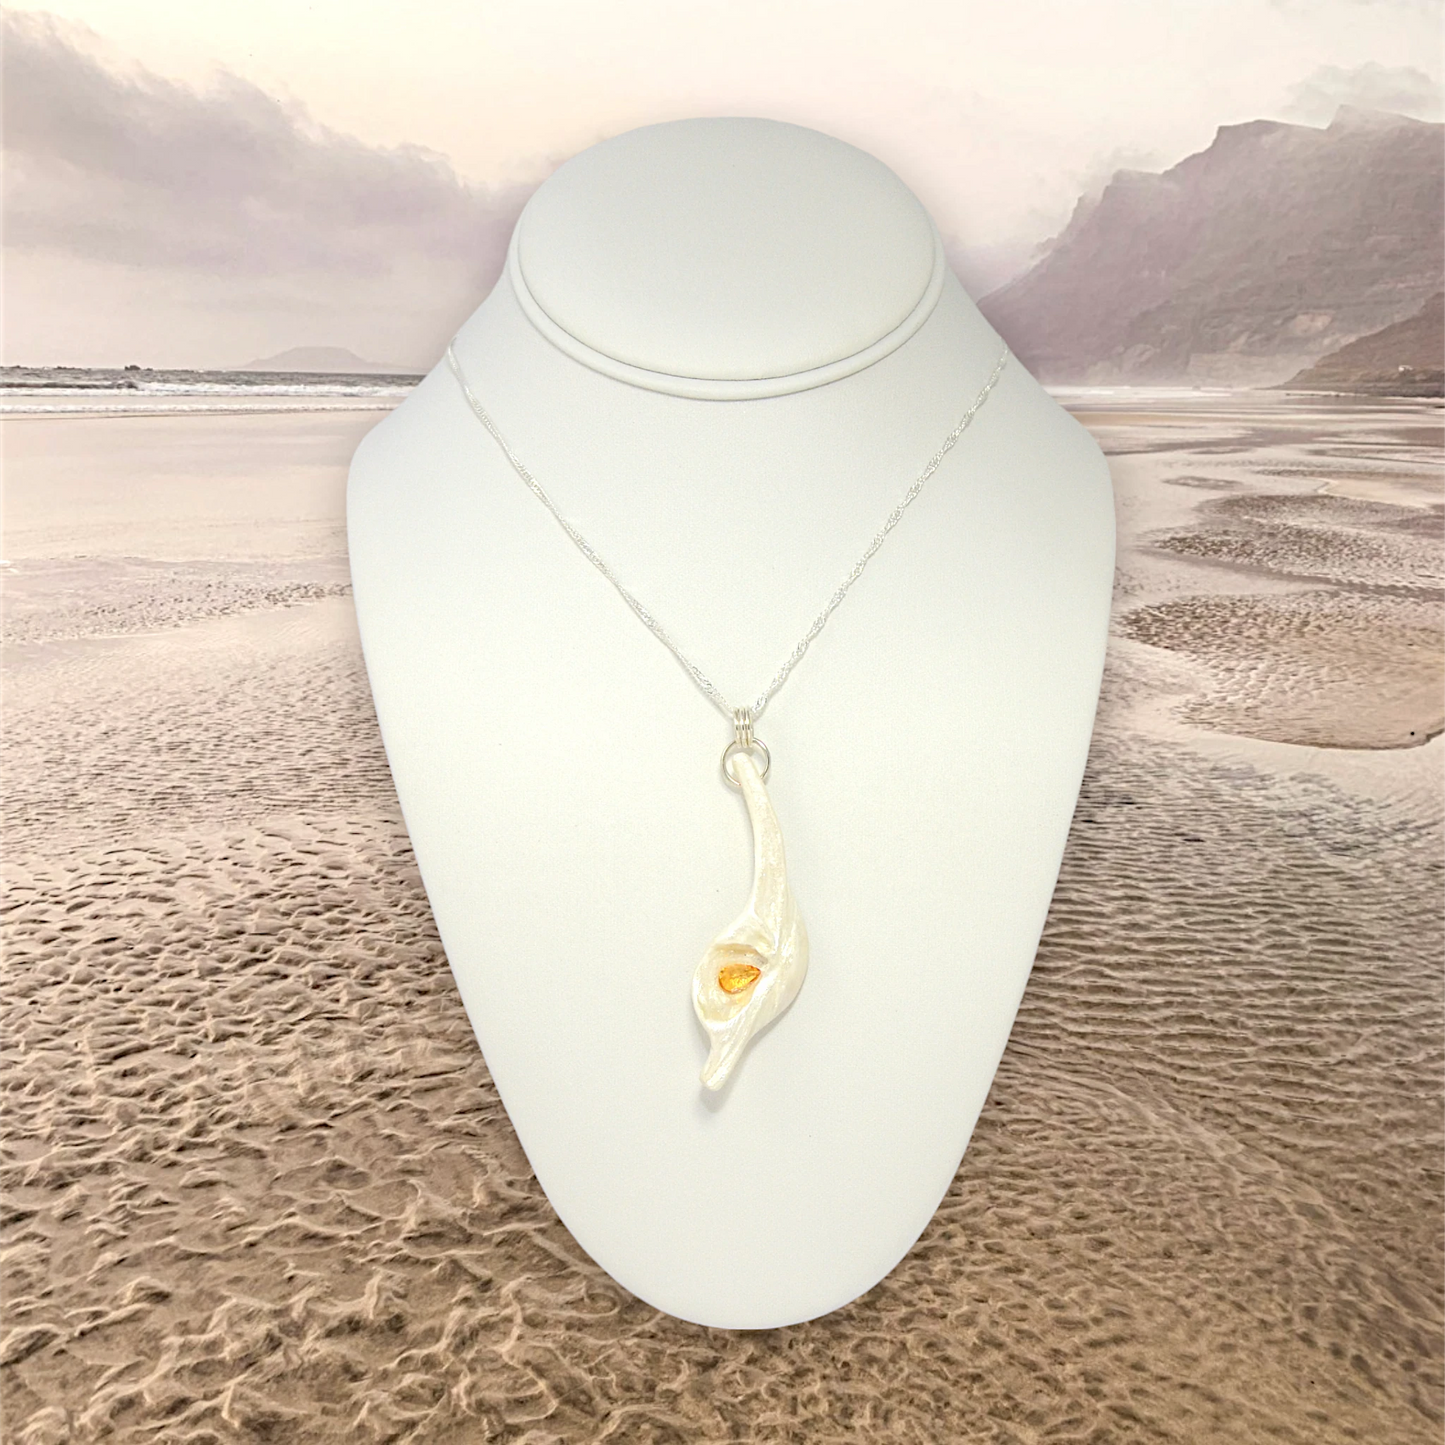 Sun Star natural seashell pendant with a beautiful pear shaped rose cut Citrine. A misty ocean background.